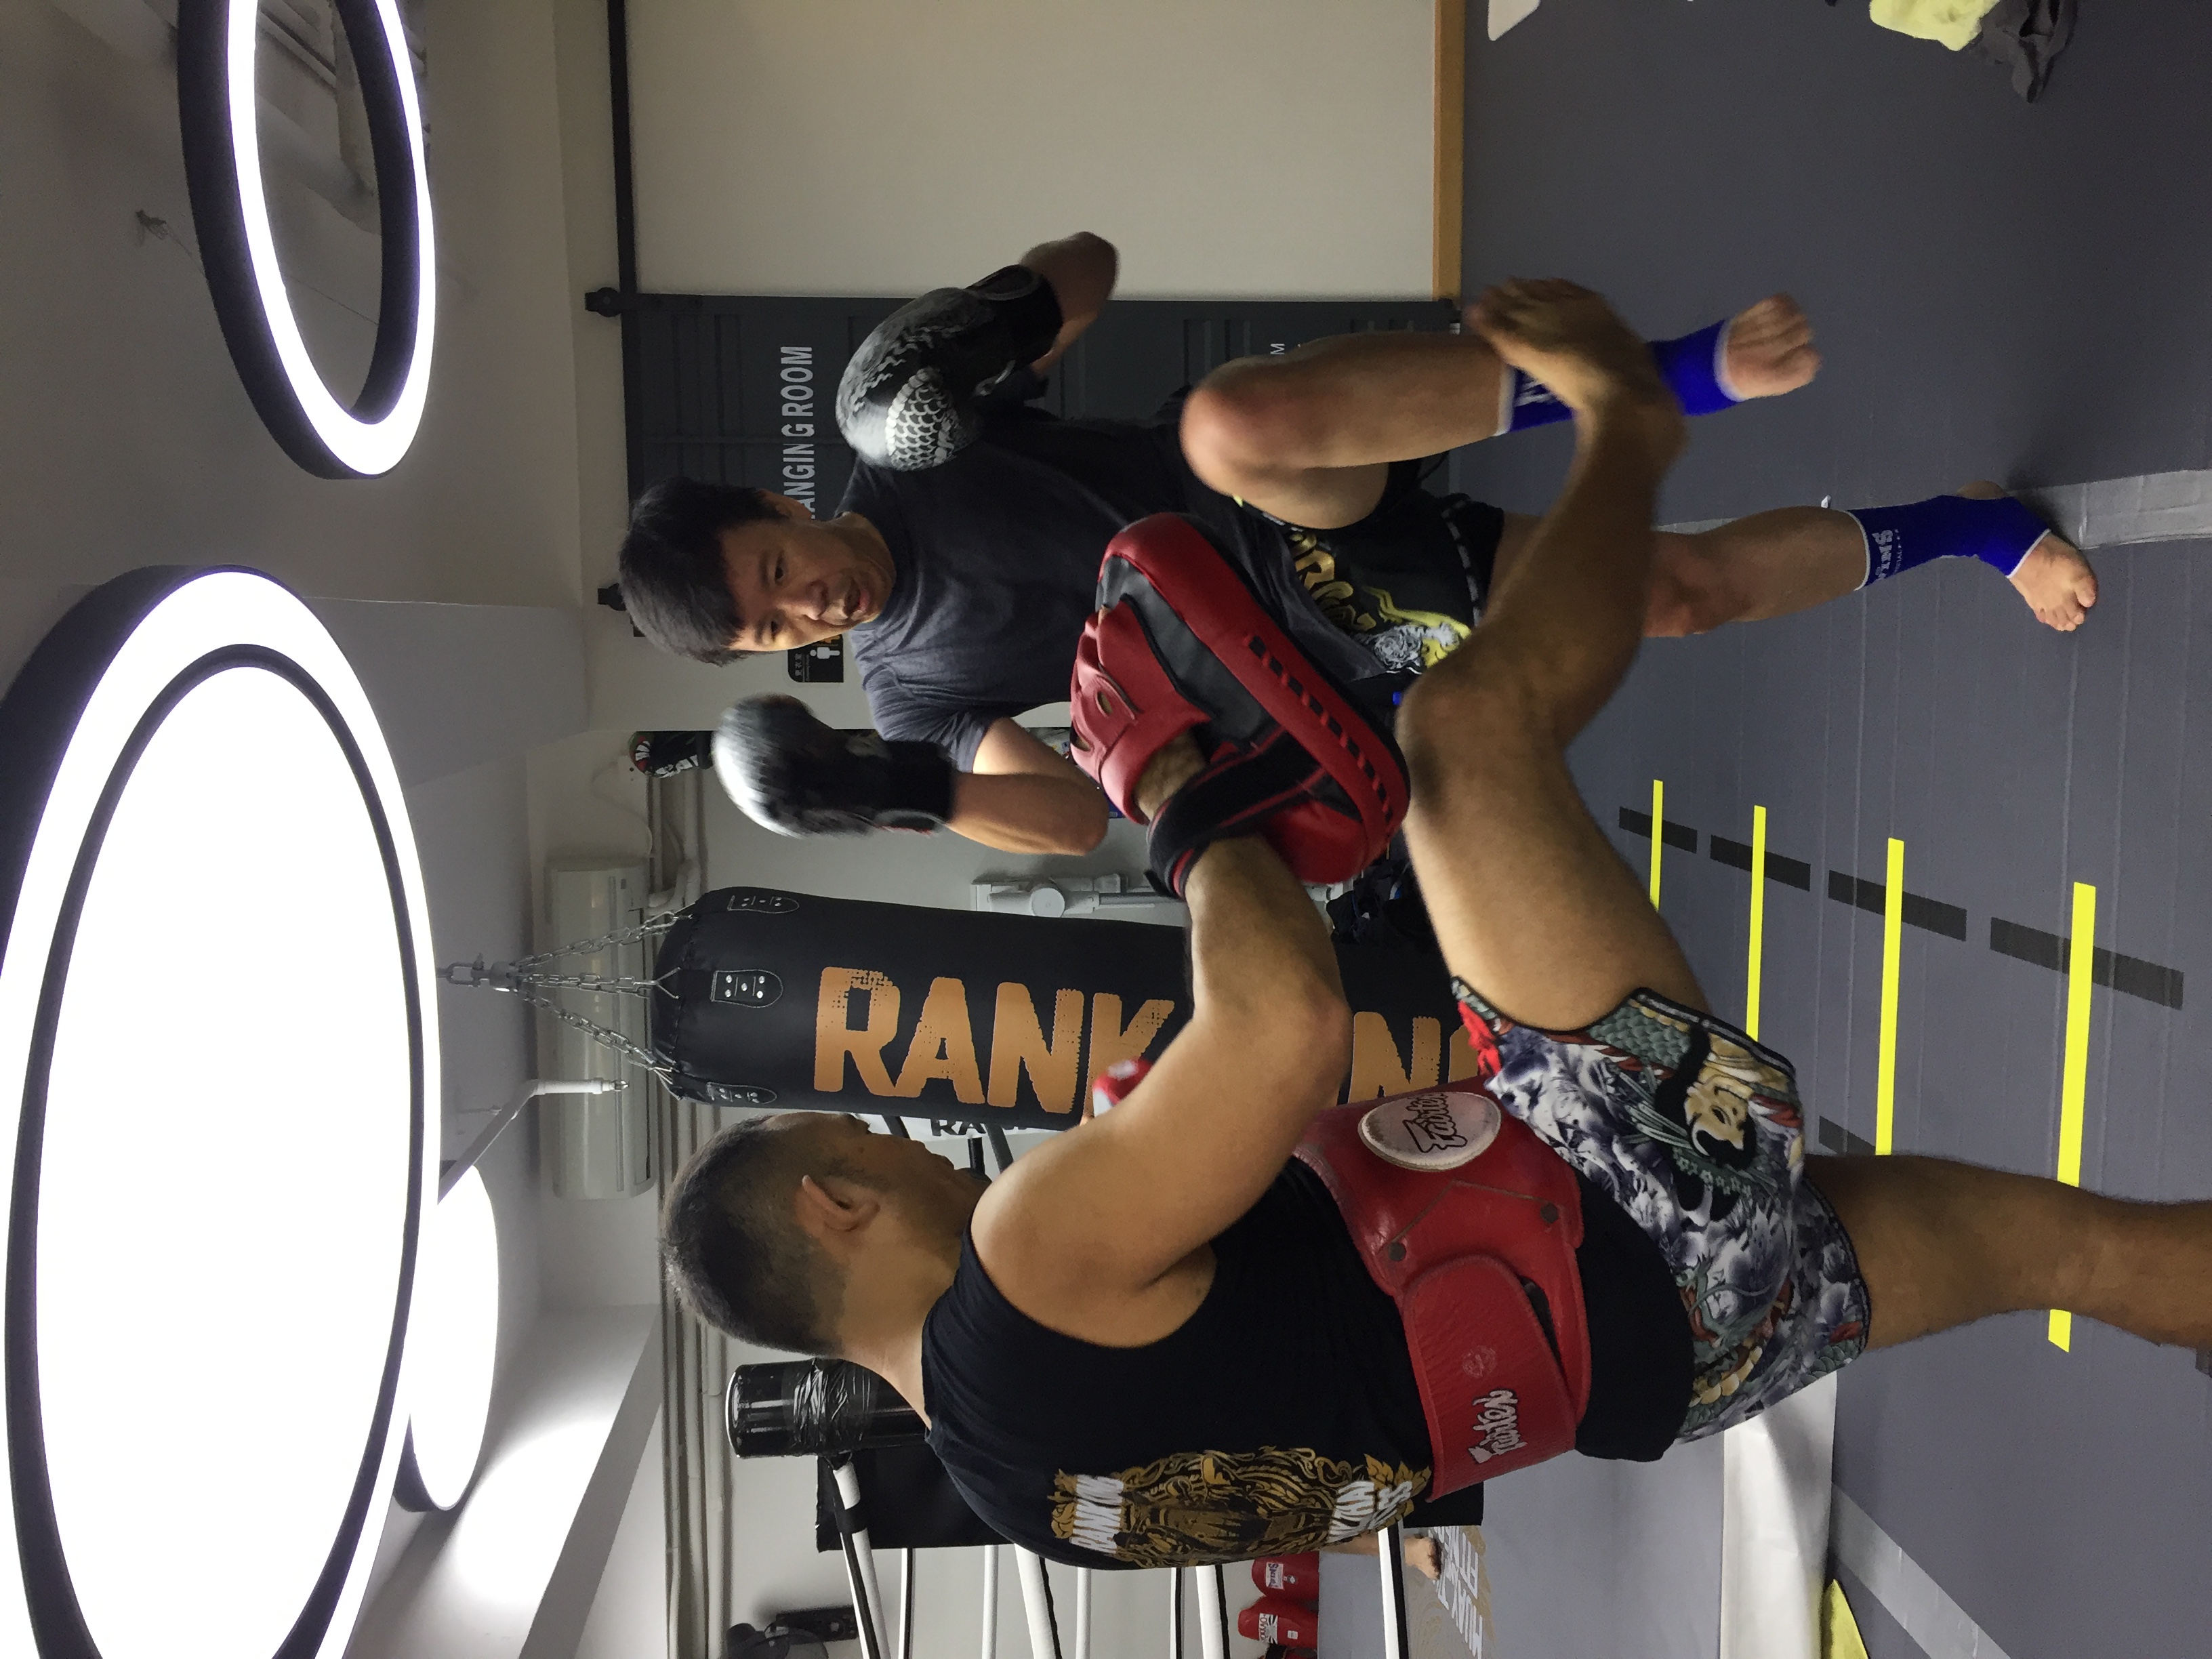 Rank King Muay Thai and Fitness